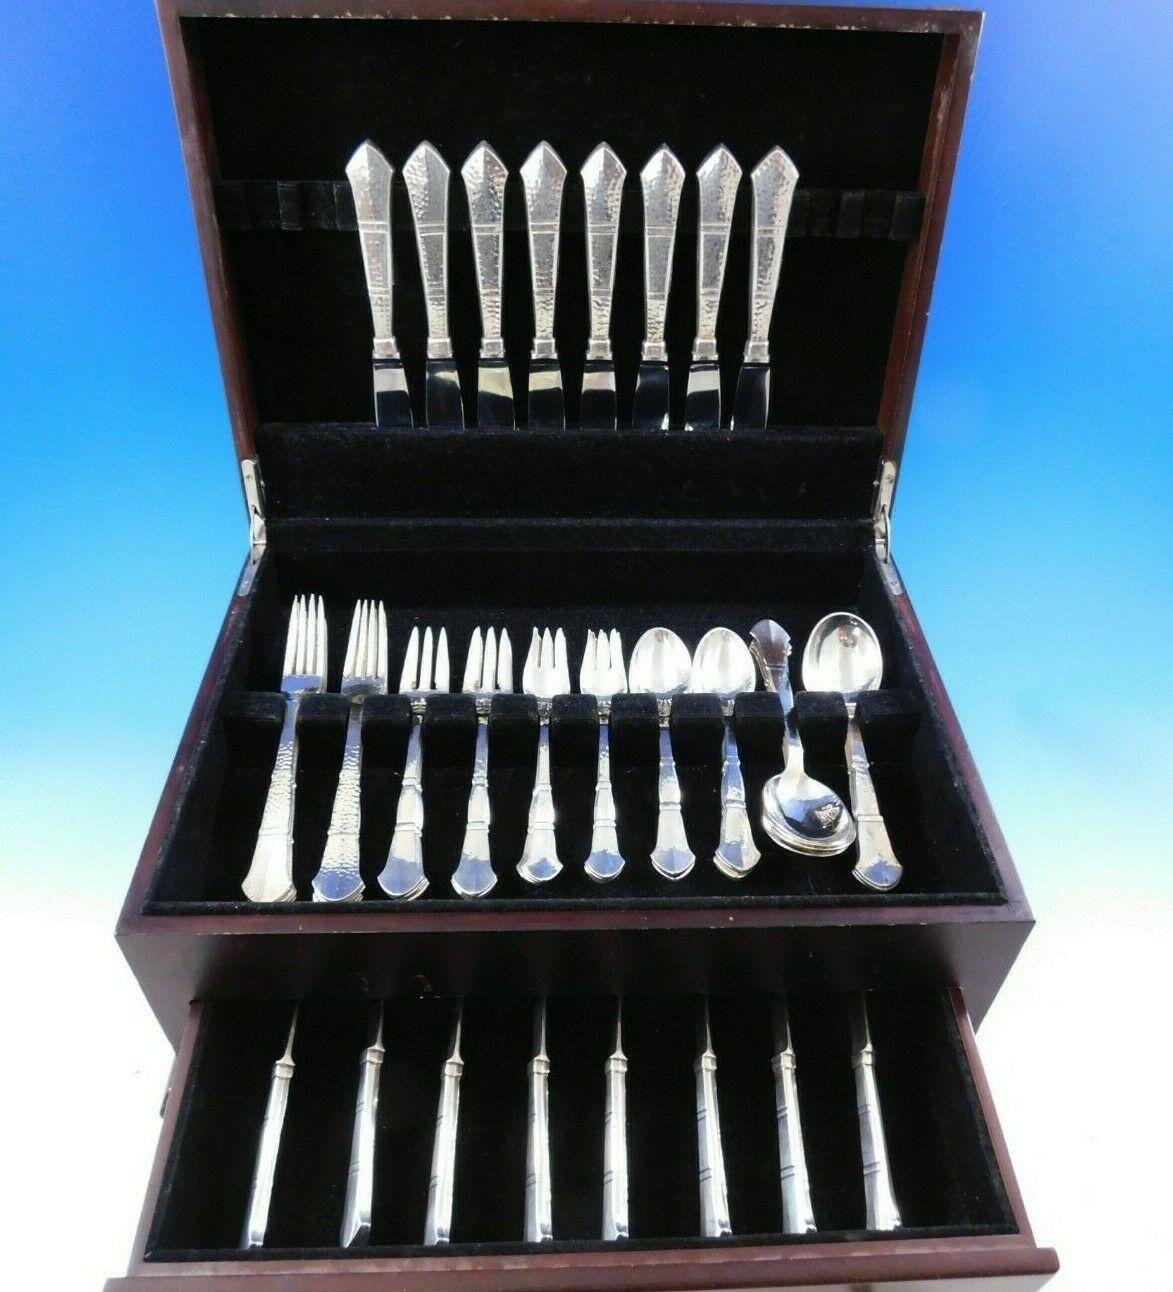 Antik by E. Dragsted Danish Mid-Century Modern sterling silver flatware set, 56 pieces. This scarce handmade set includes:

8 knives, serrated, 8